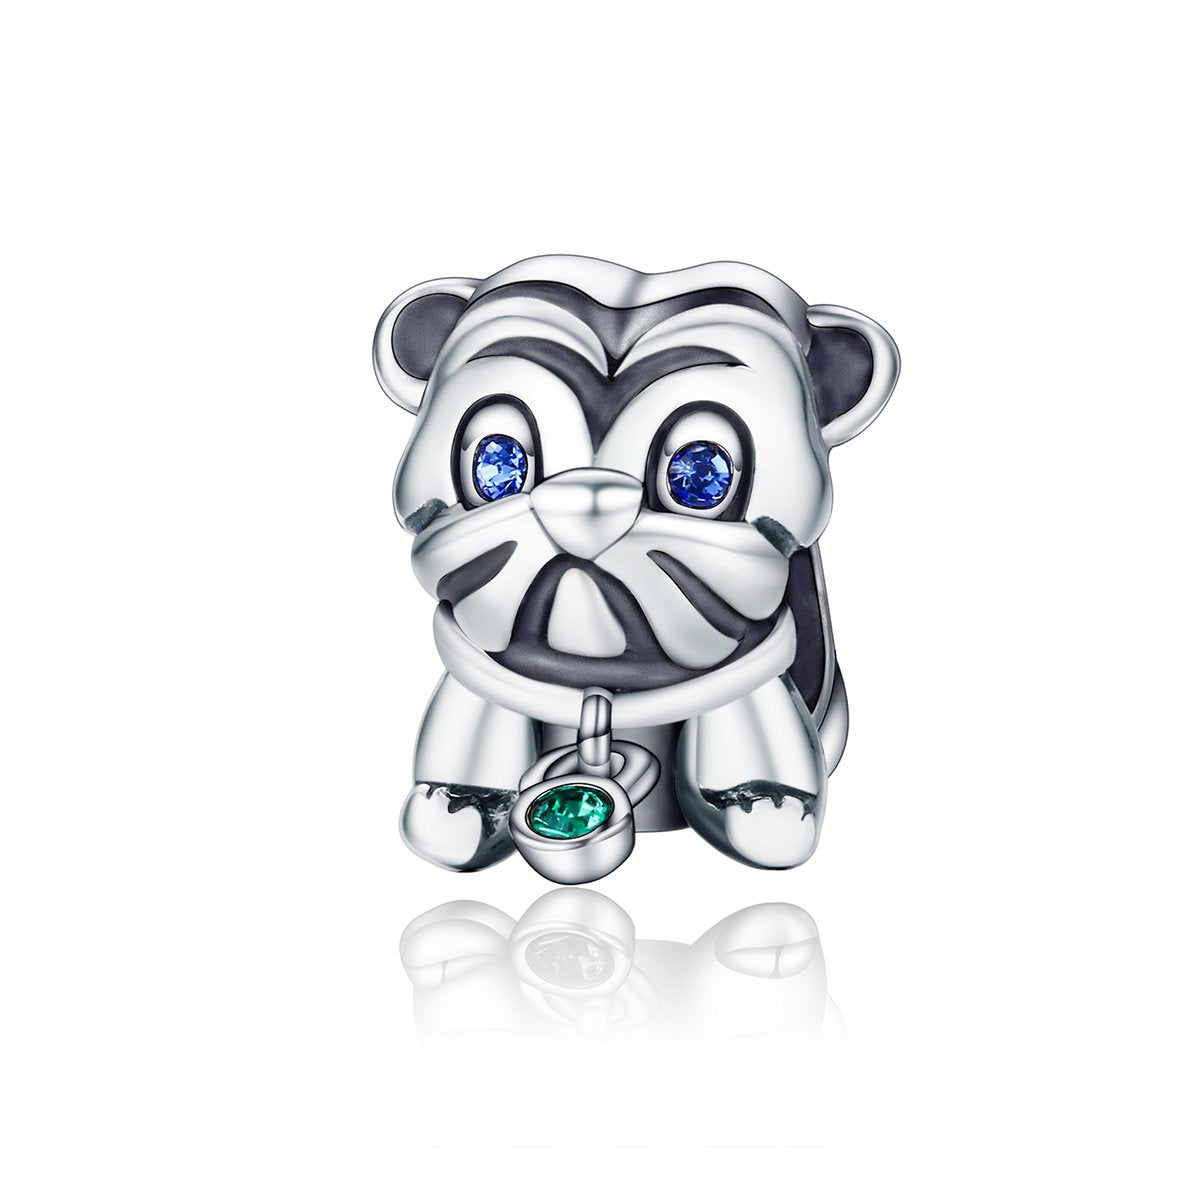 Sterling 925 silver charm the baby puppy home bead pendant fits Pandora charm and European charm bracelet Xaxe.com